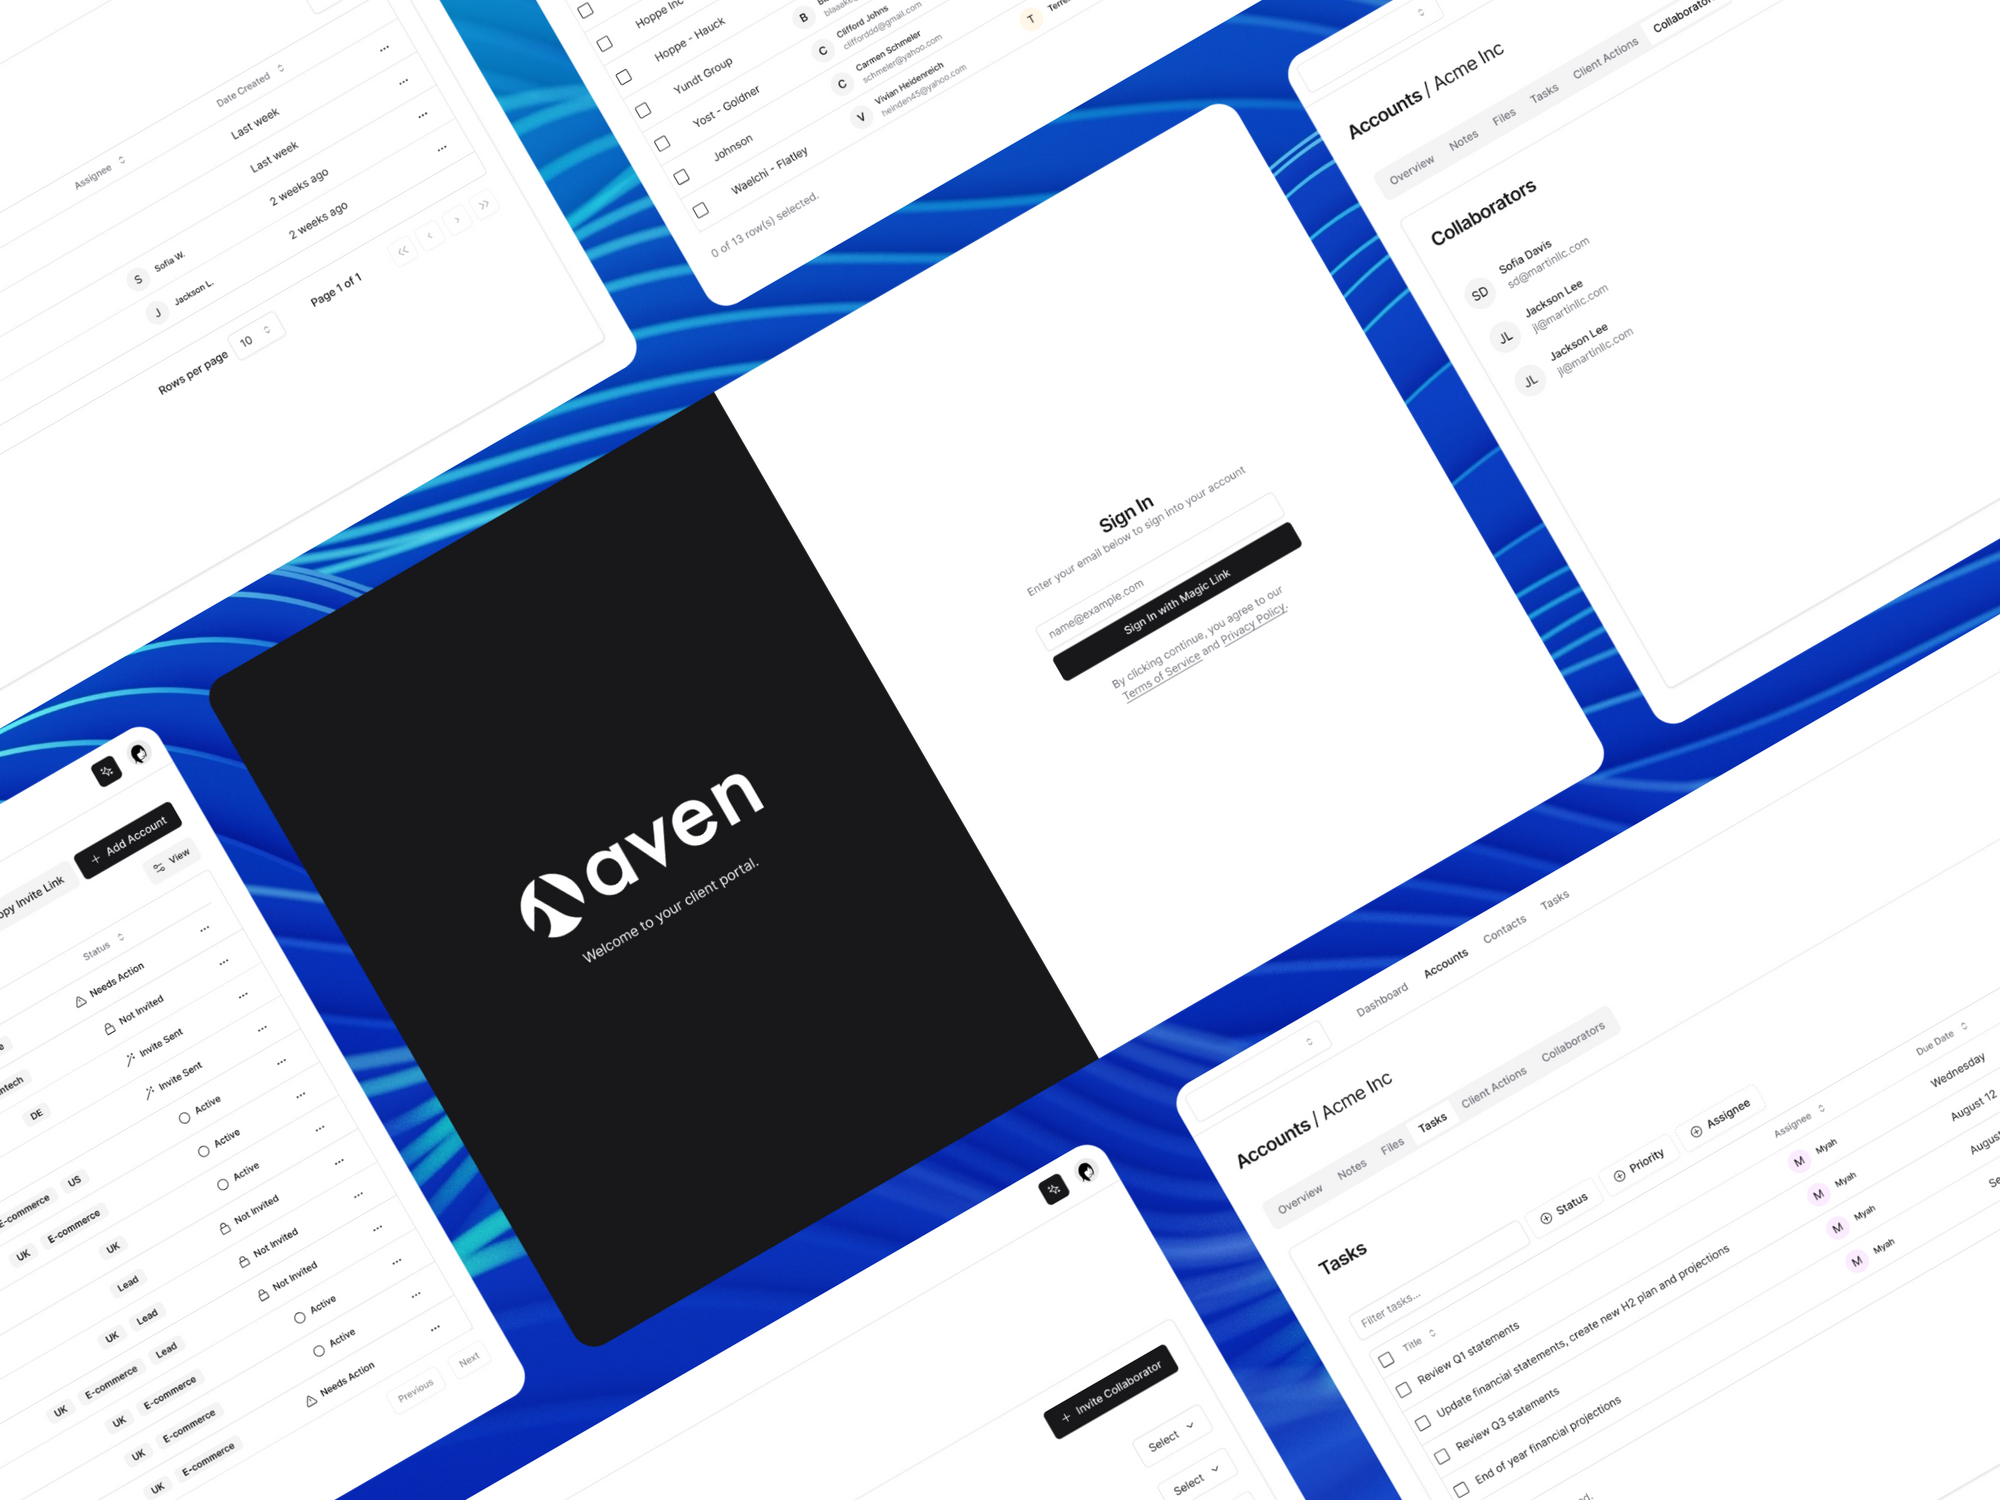 Introducing AvenHQ - Revolutionizing Professional Service Firms